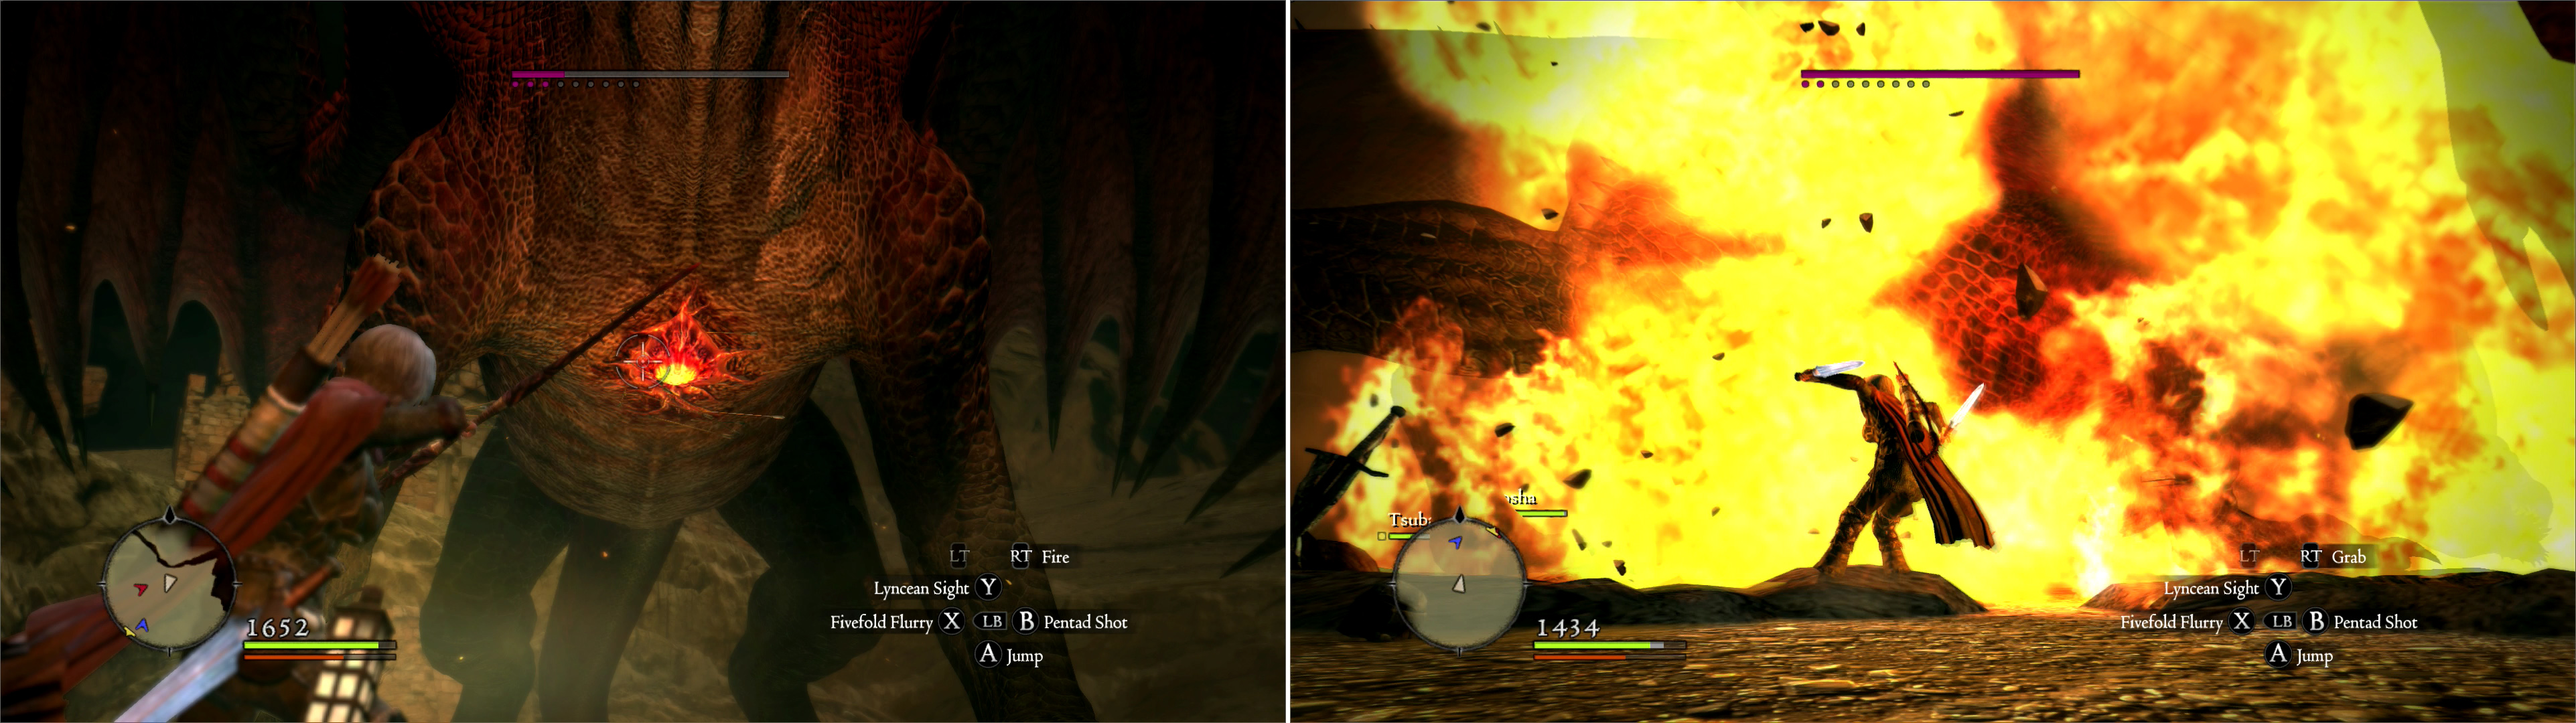 The Dragon’s heart, of course, is its vulnerable spot (left). The Dragon has many ways to harm Arisens that challenge it, but fire is perhaps its most spectacular - and iconic - form of offense (right).